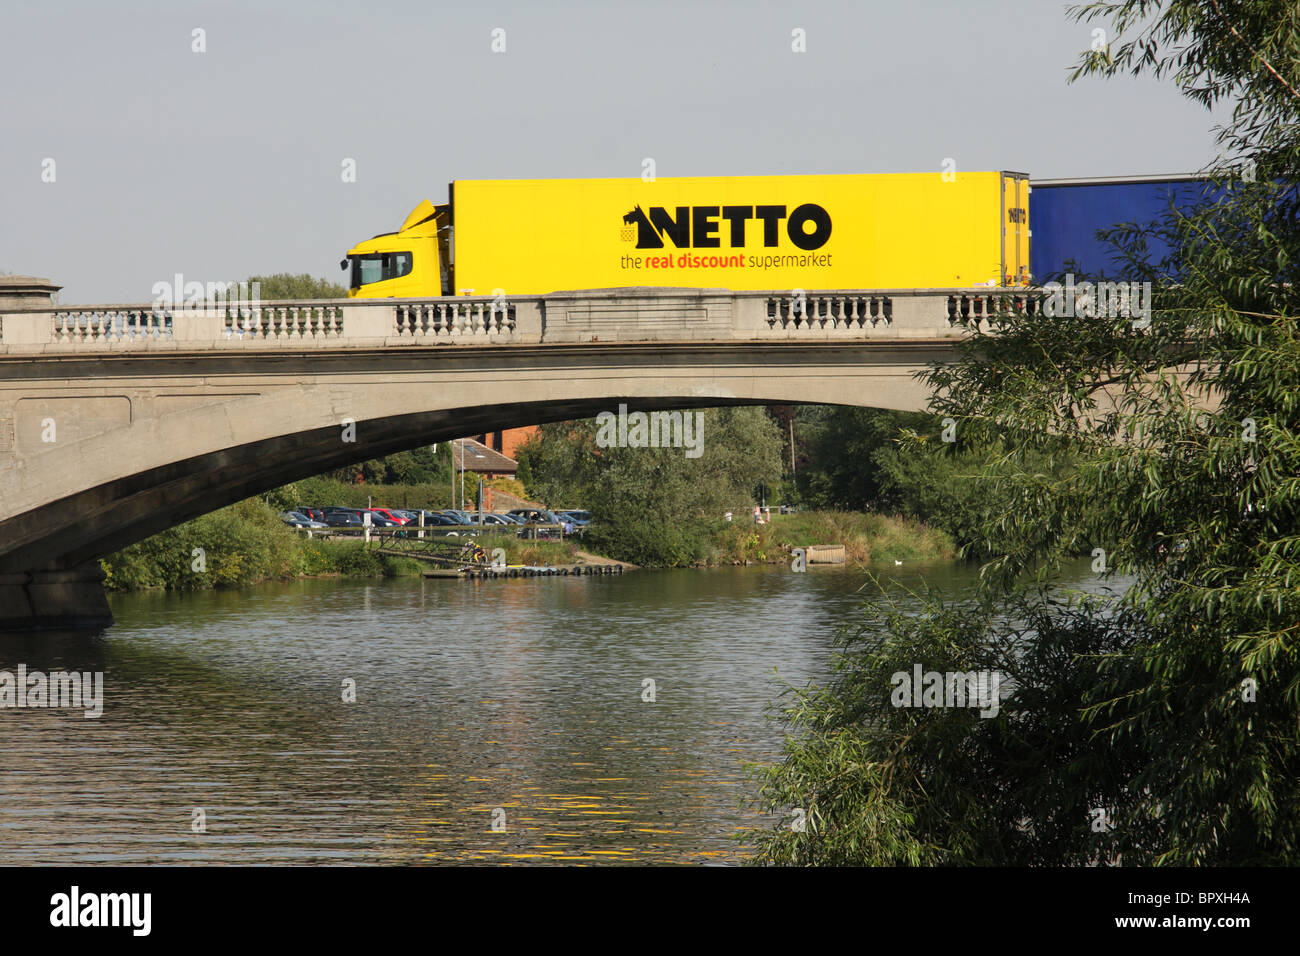 A Netto supermarket delivery truck in the U.K. Stock Photo